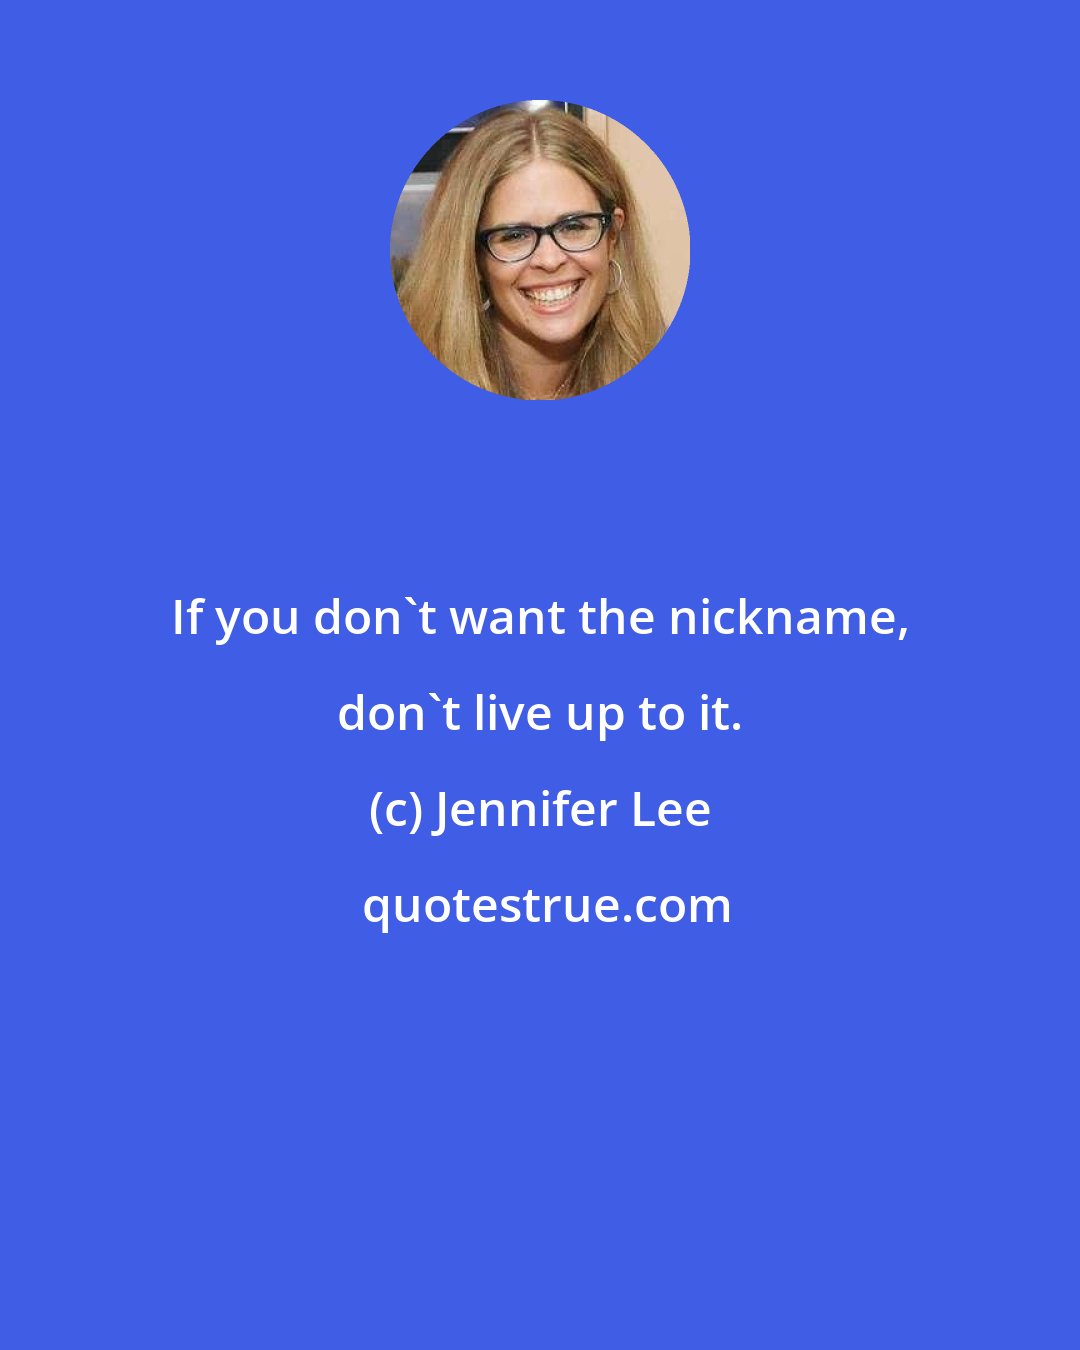 Jennifer Lee: If you don't want the nickname, don't live up to it.